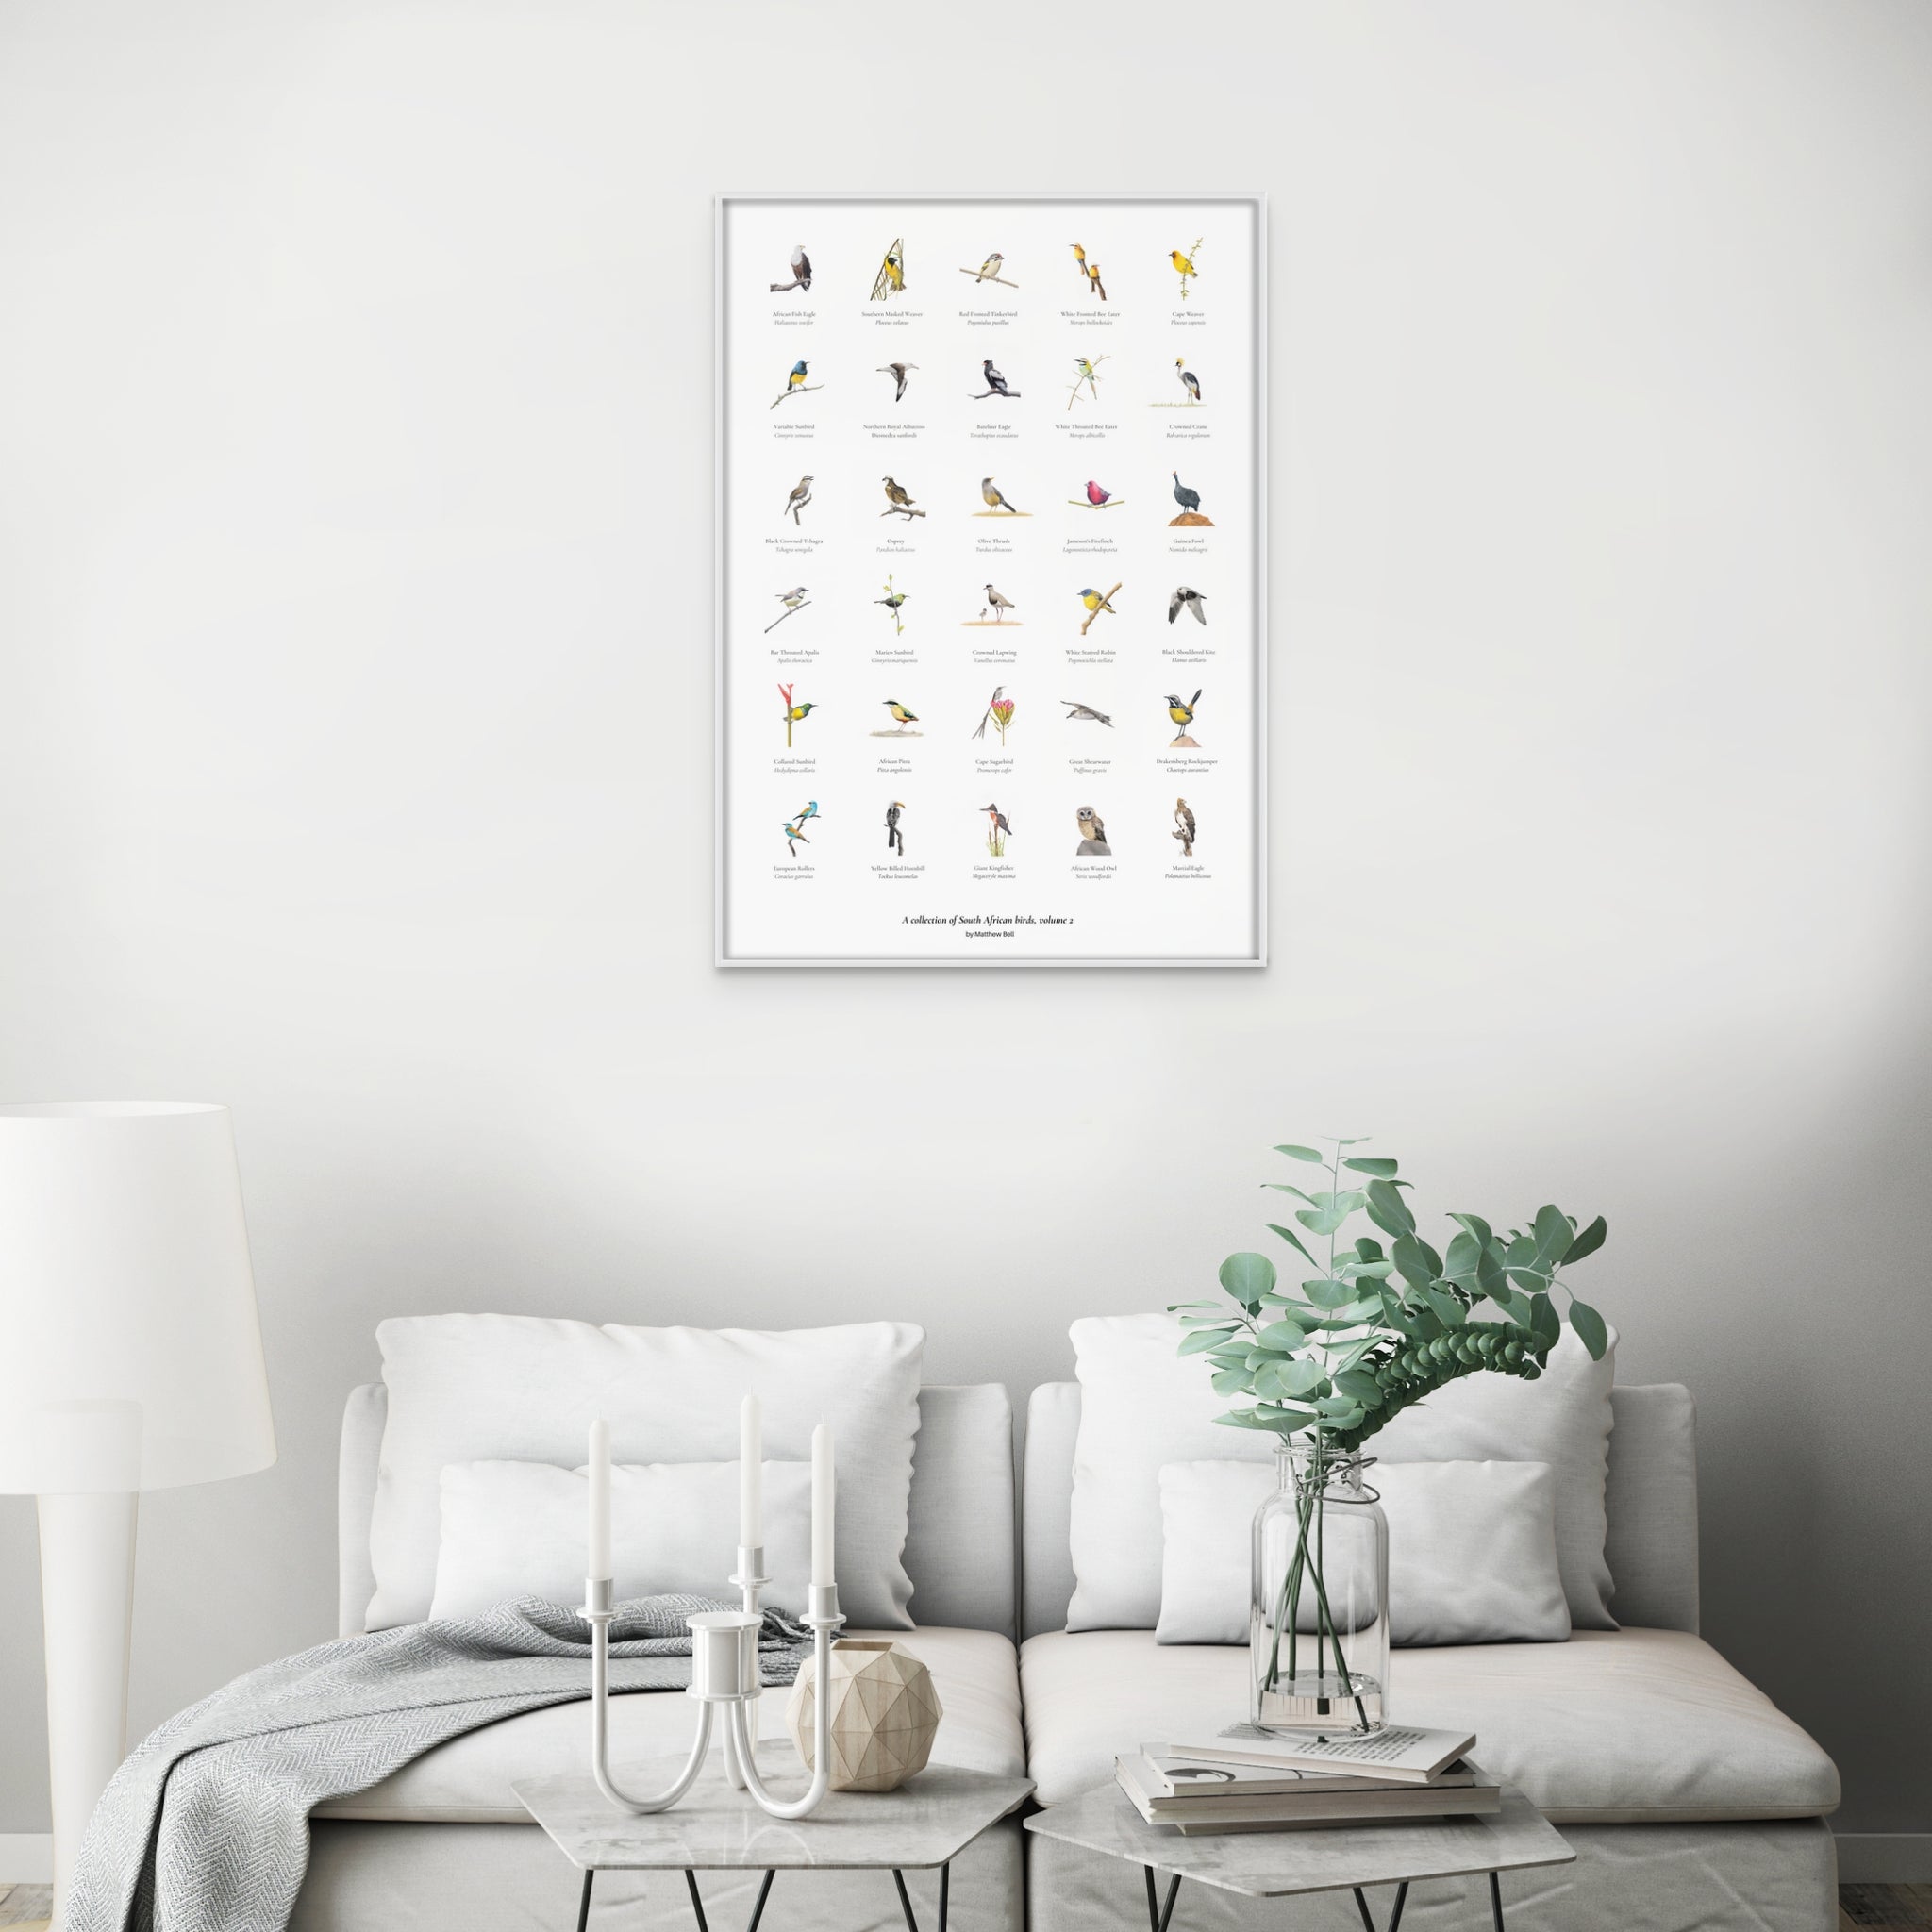 A collection of South African birds artwork volume 2 by wildlife artist Matthew Bell